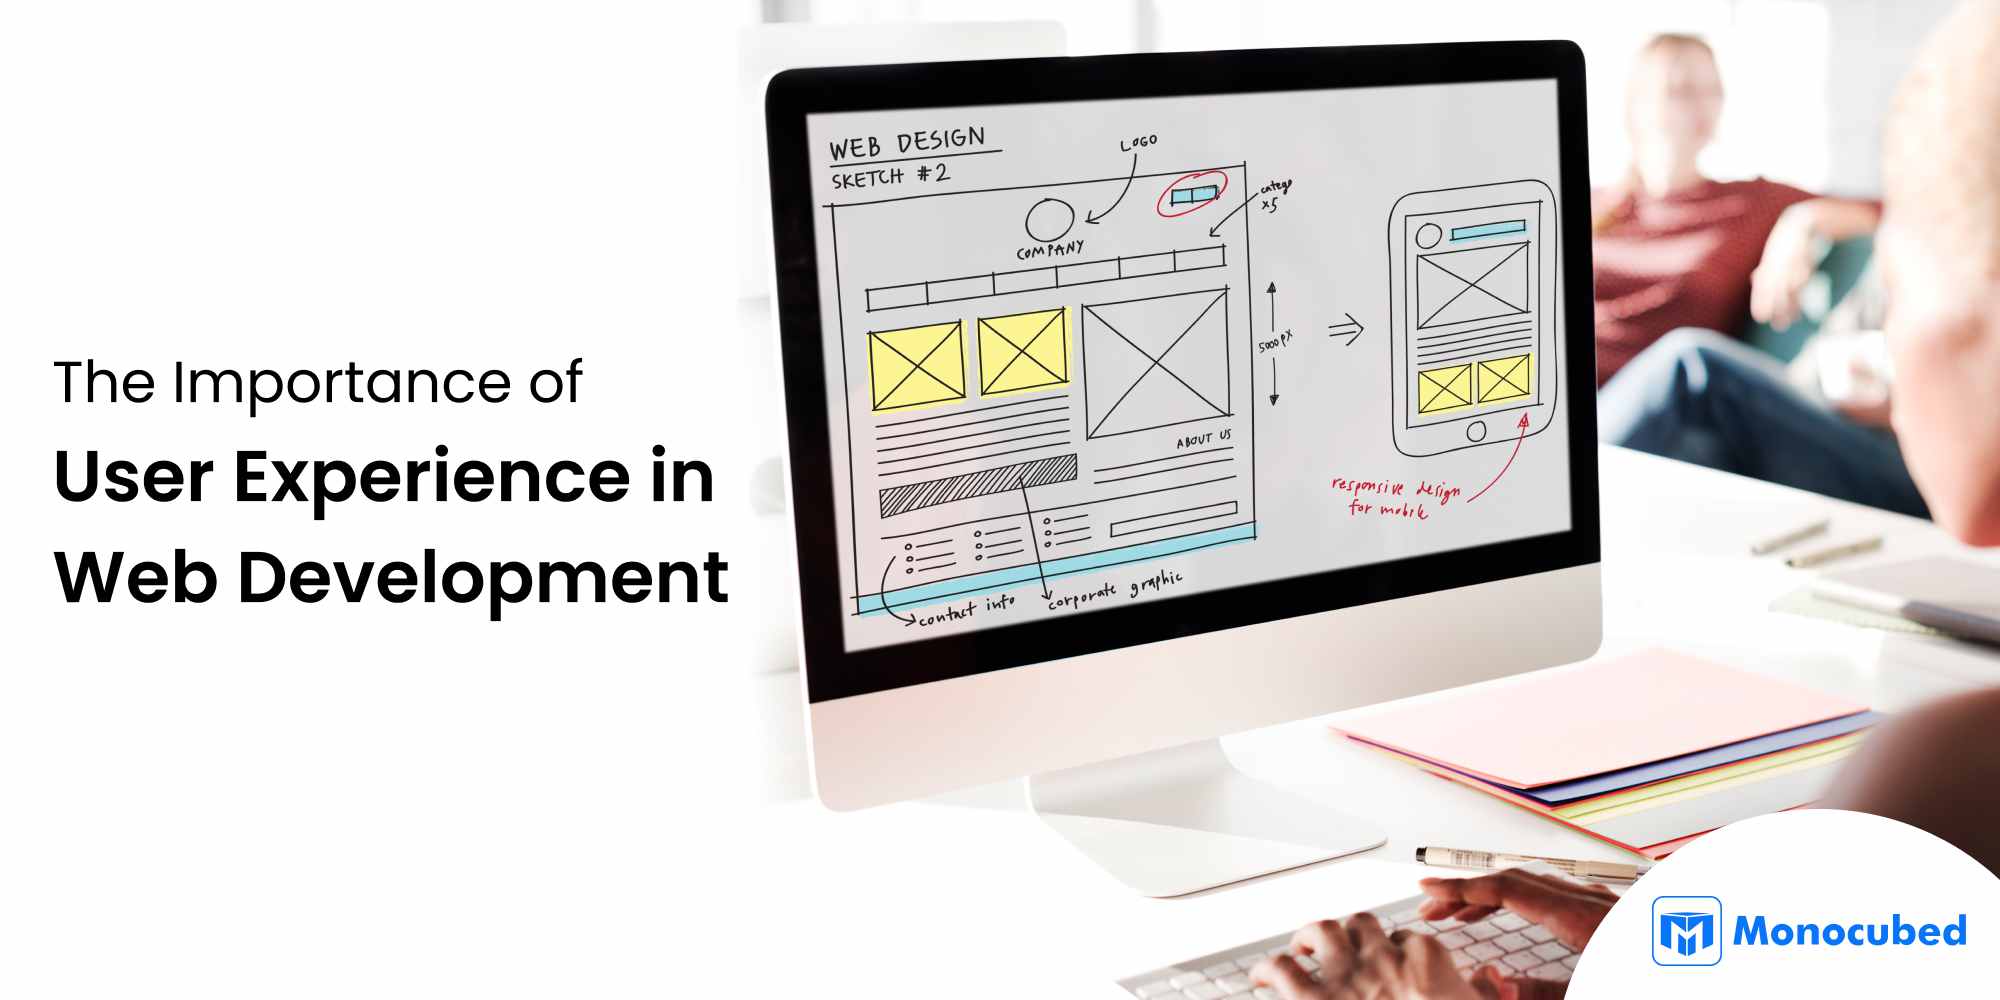 The Importance of User Experience in Web Development